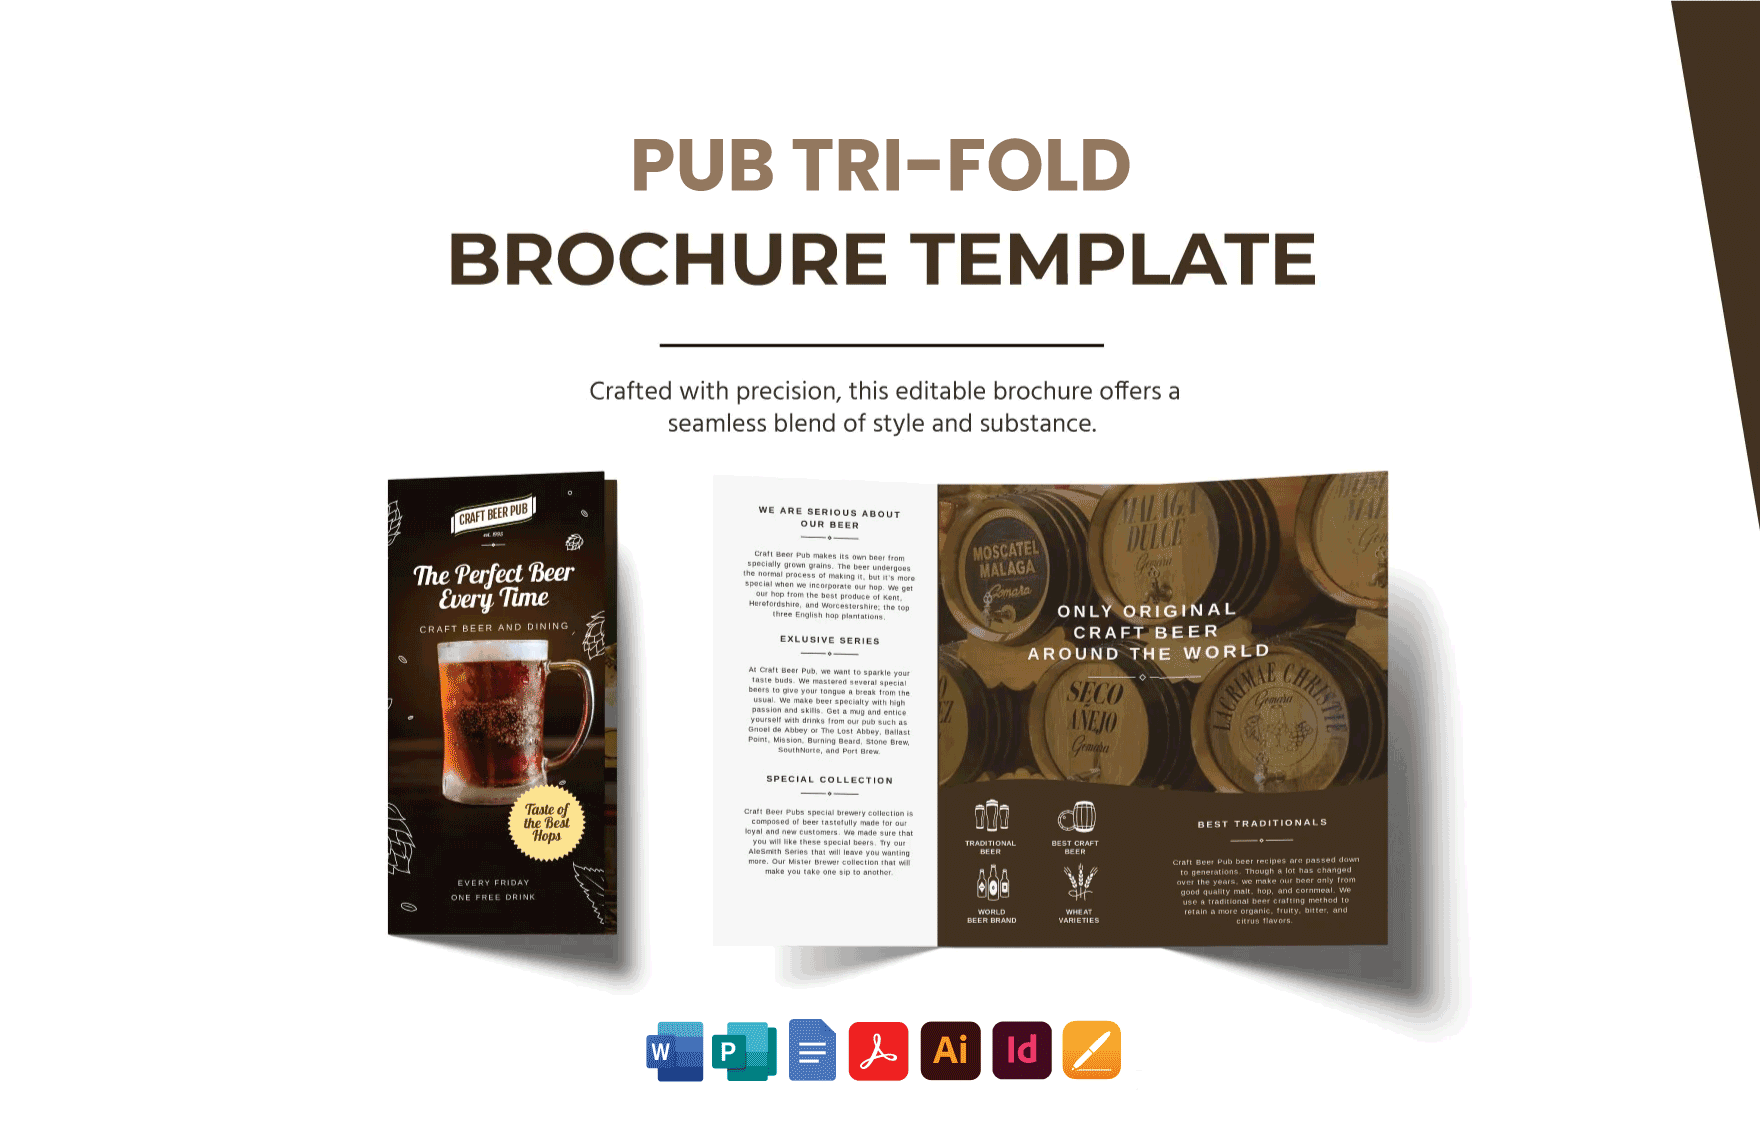 Free Pub Tri-Fold Brochure Template in Word, Google Docs, Illustrator, PSD, Apple Pages, Publisher, InDesign